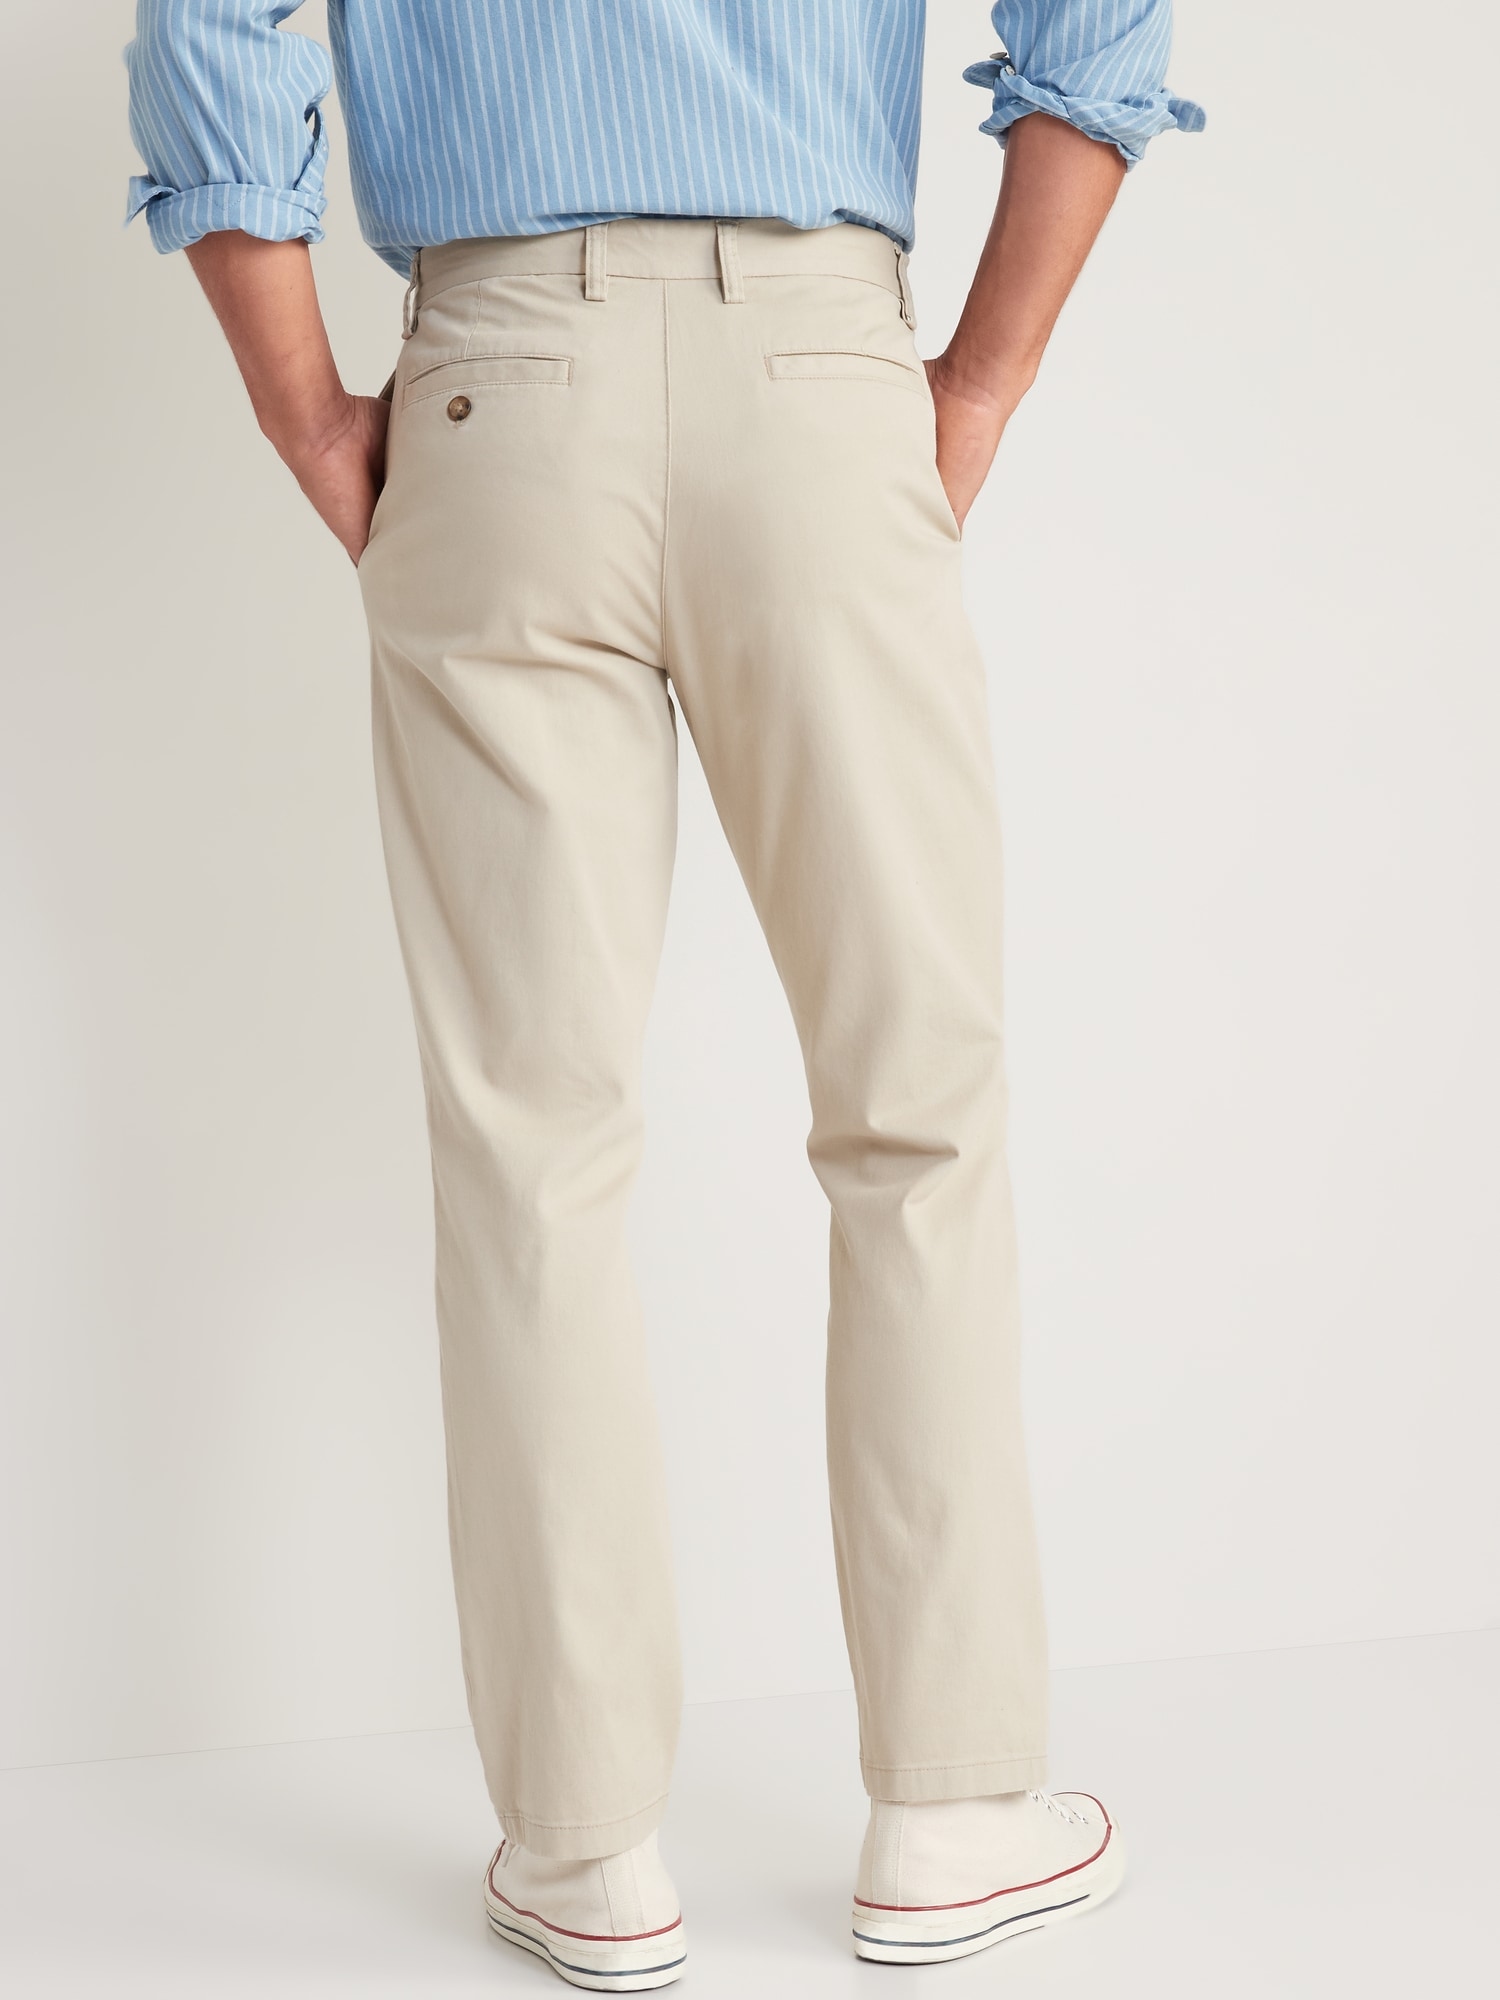 Mens White Cotton Blend Solid Chinos